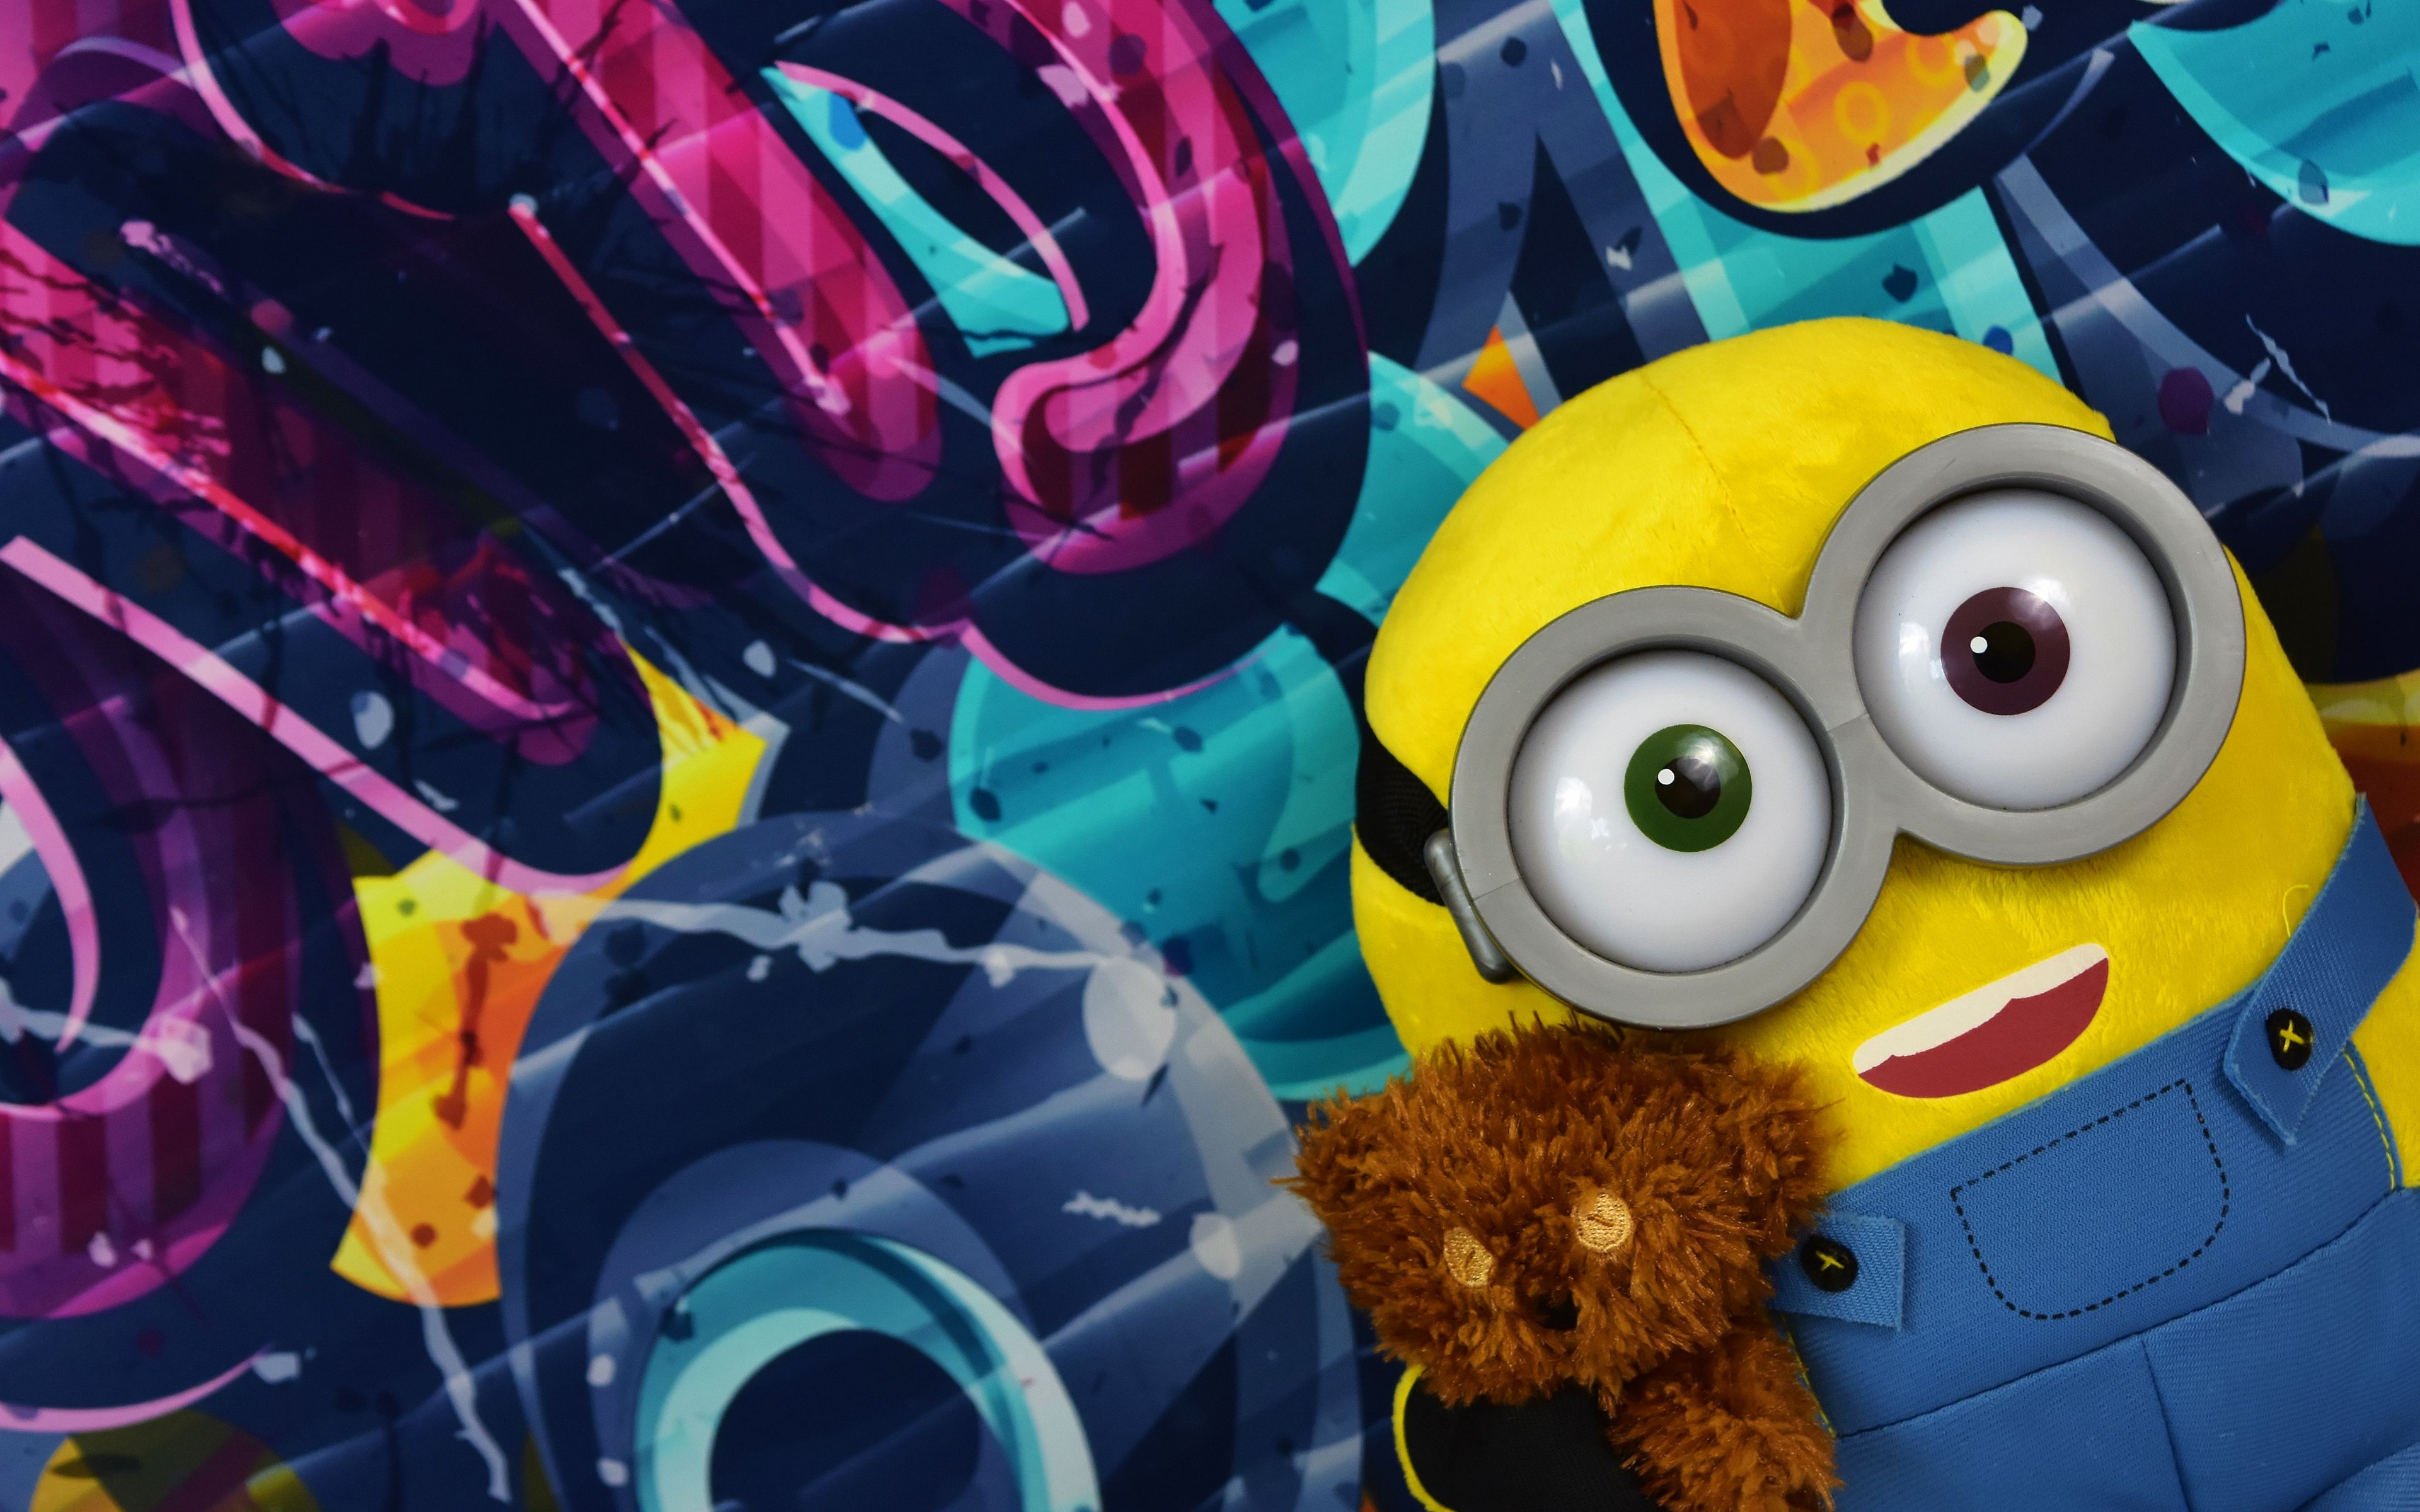 Download Wallpaper 4k, Minion, Graffiti, Toys, Minions, Despicable Me, 3D Animation For Desktop With Resolution 3840x2400. High Quality HD Picture Wallpaper